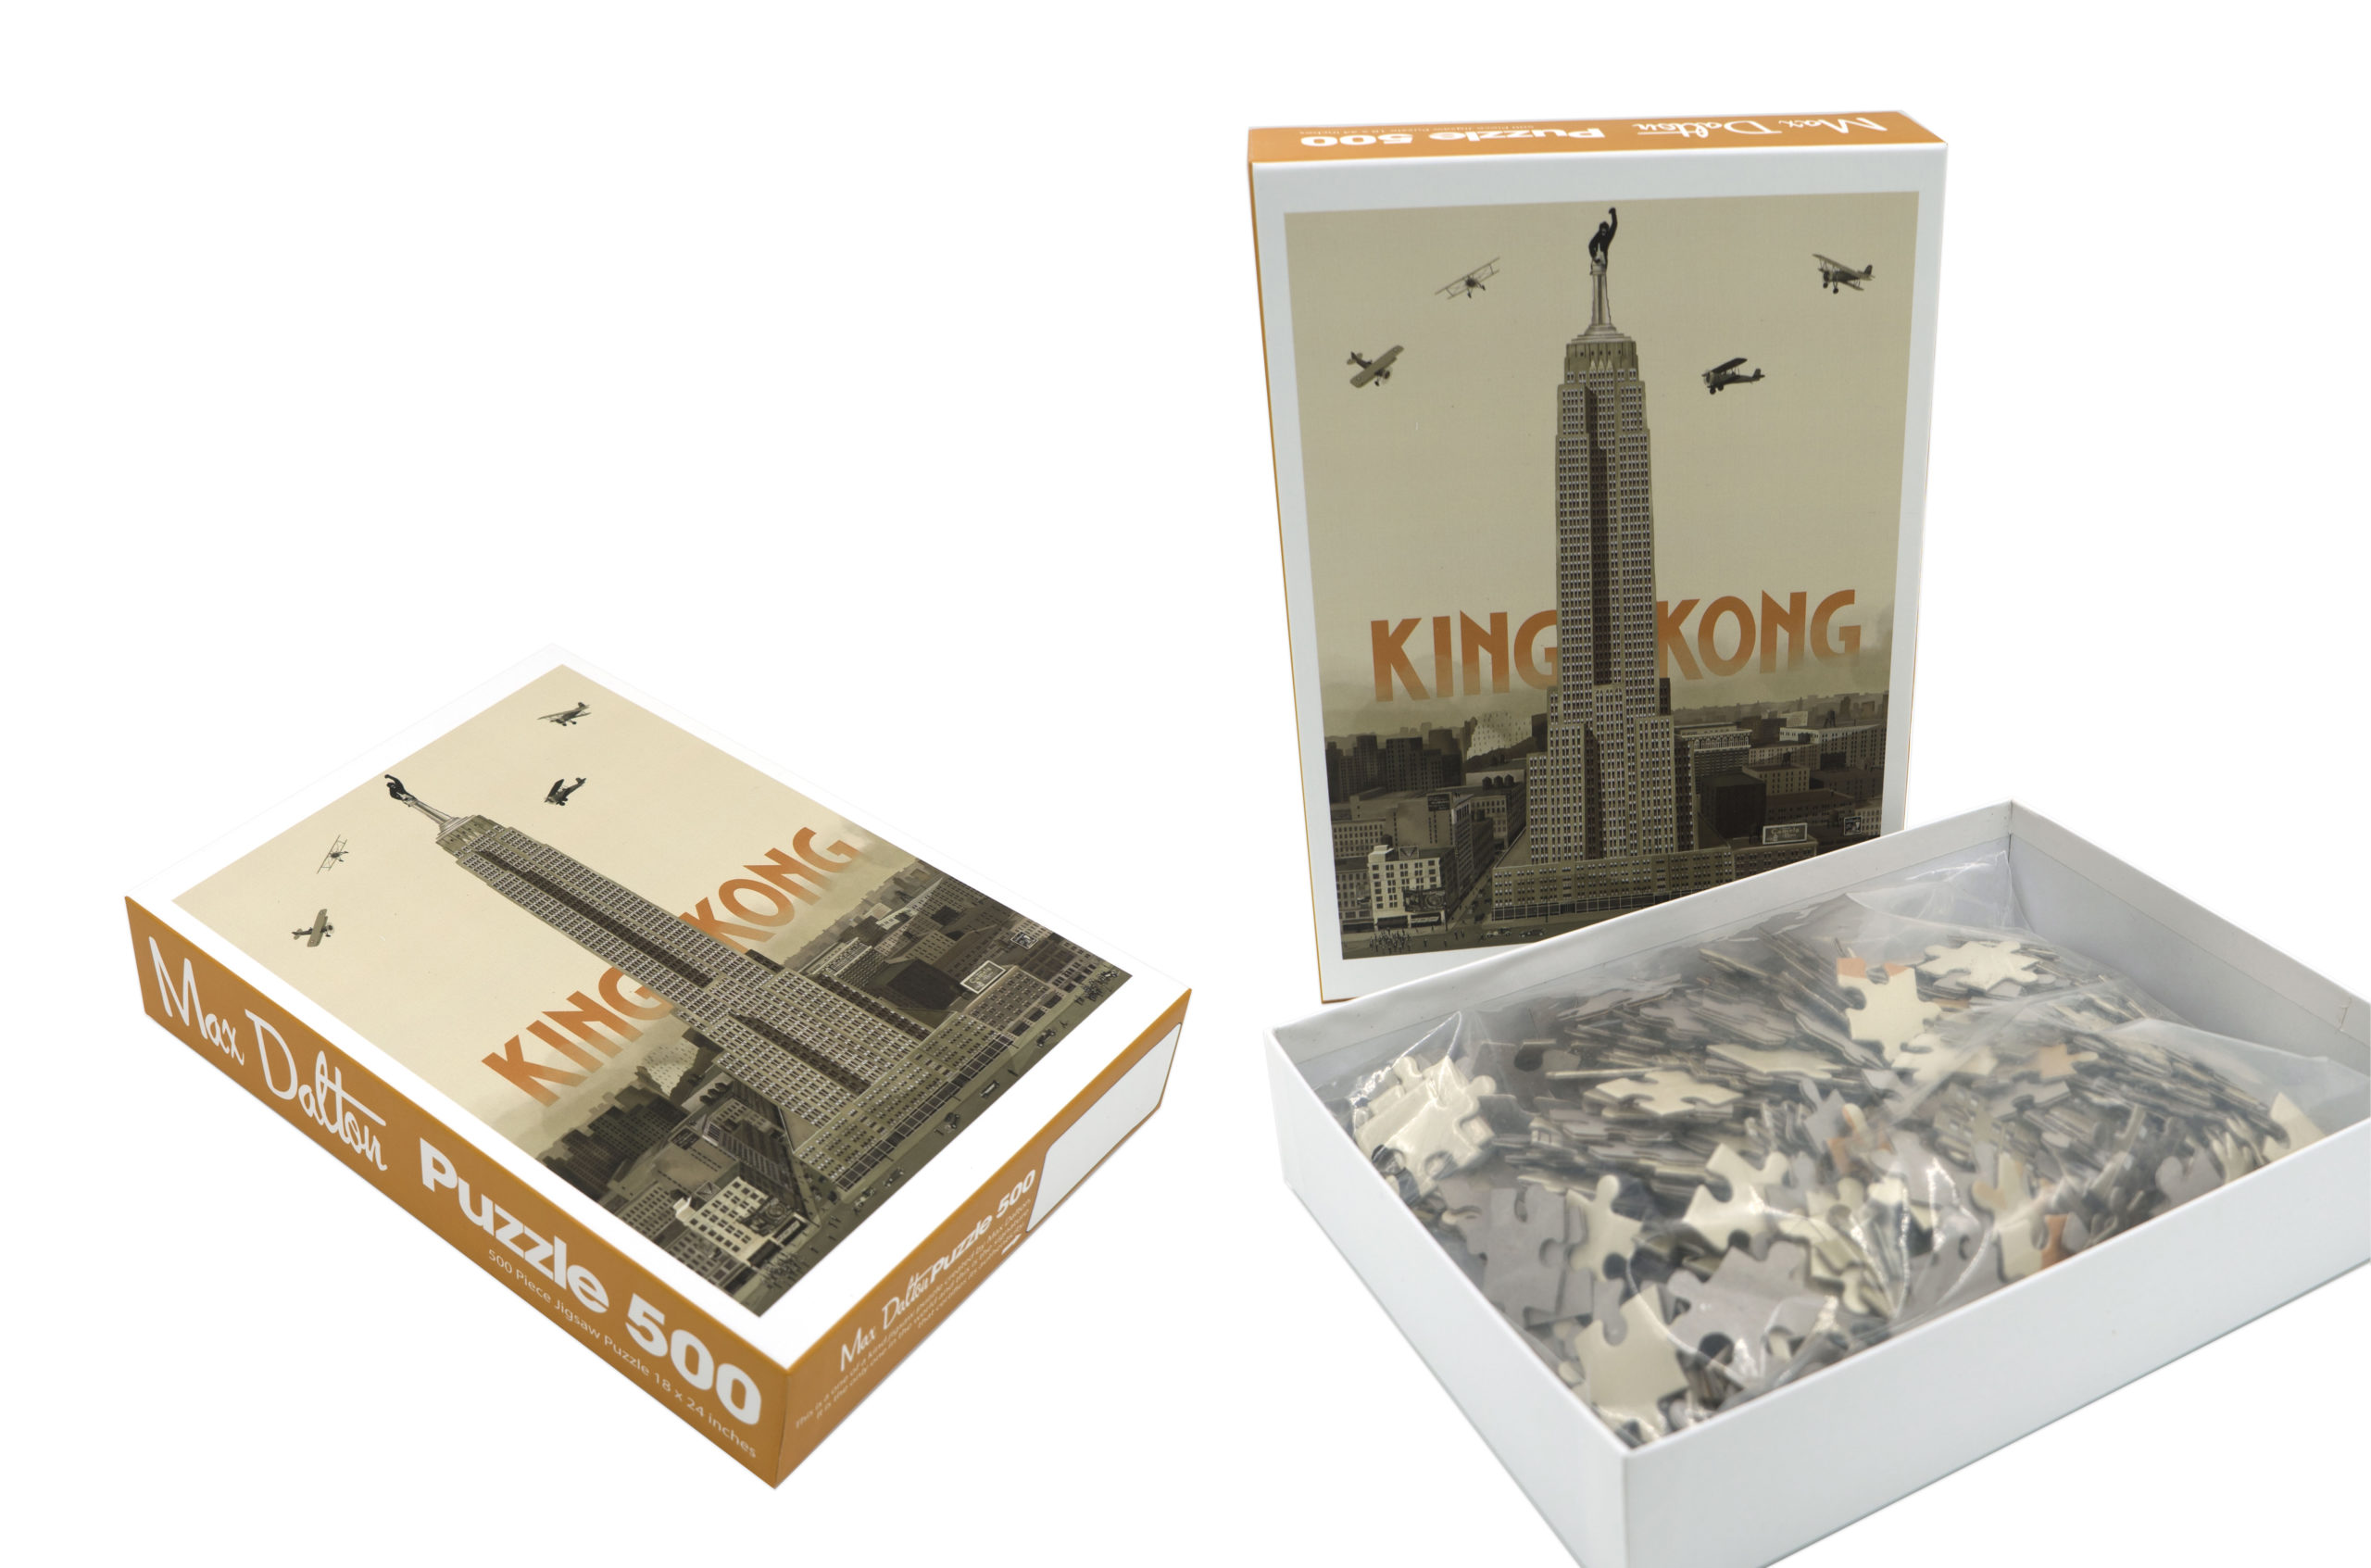 A King Kong Jigsaw Puzzle Is Just One Of The Cool Things In Artist Max Dalton’s New Show